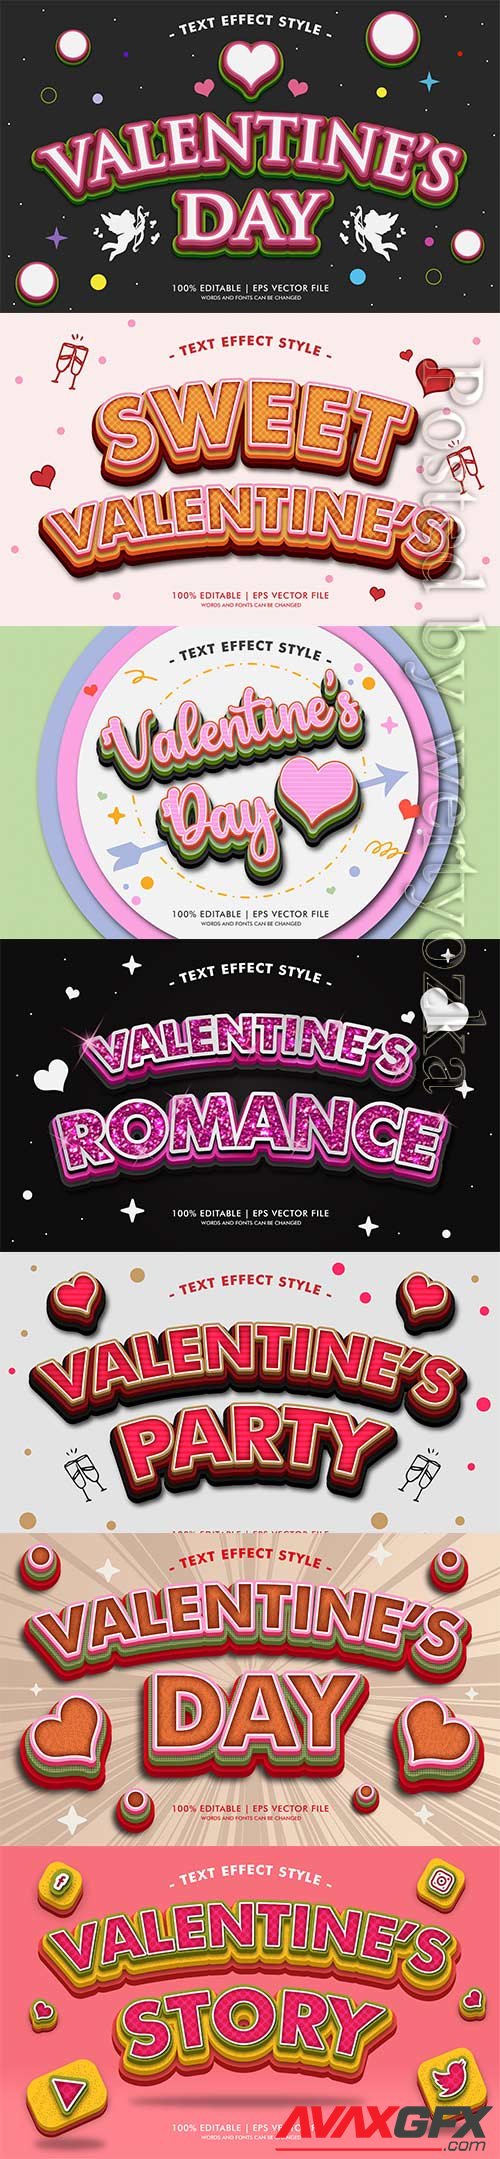 Valentine romance text effects style in vector